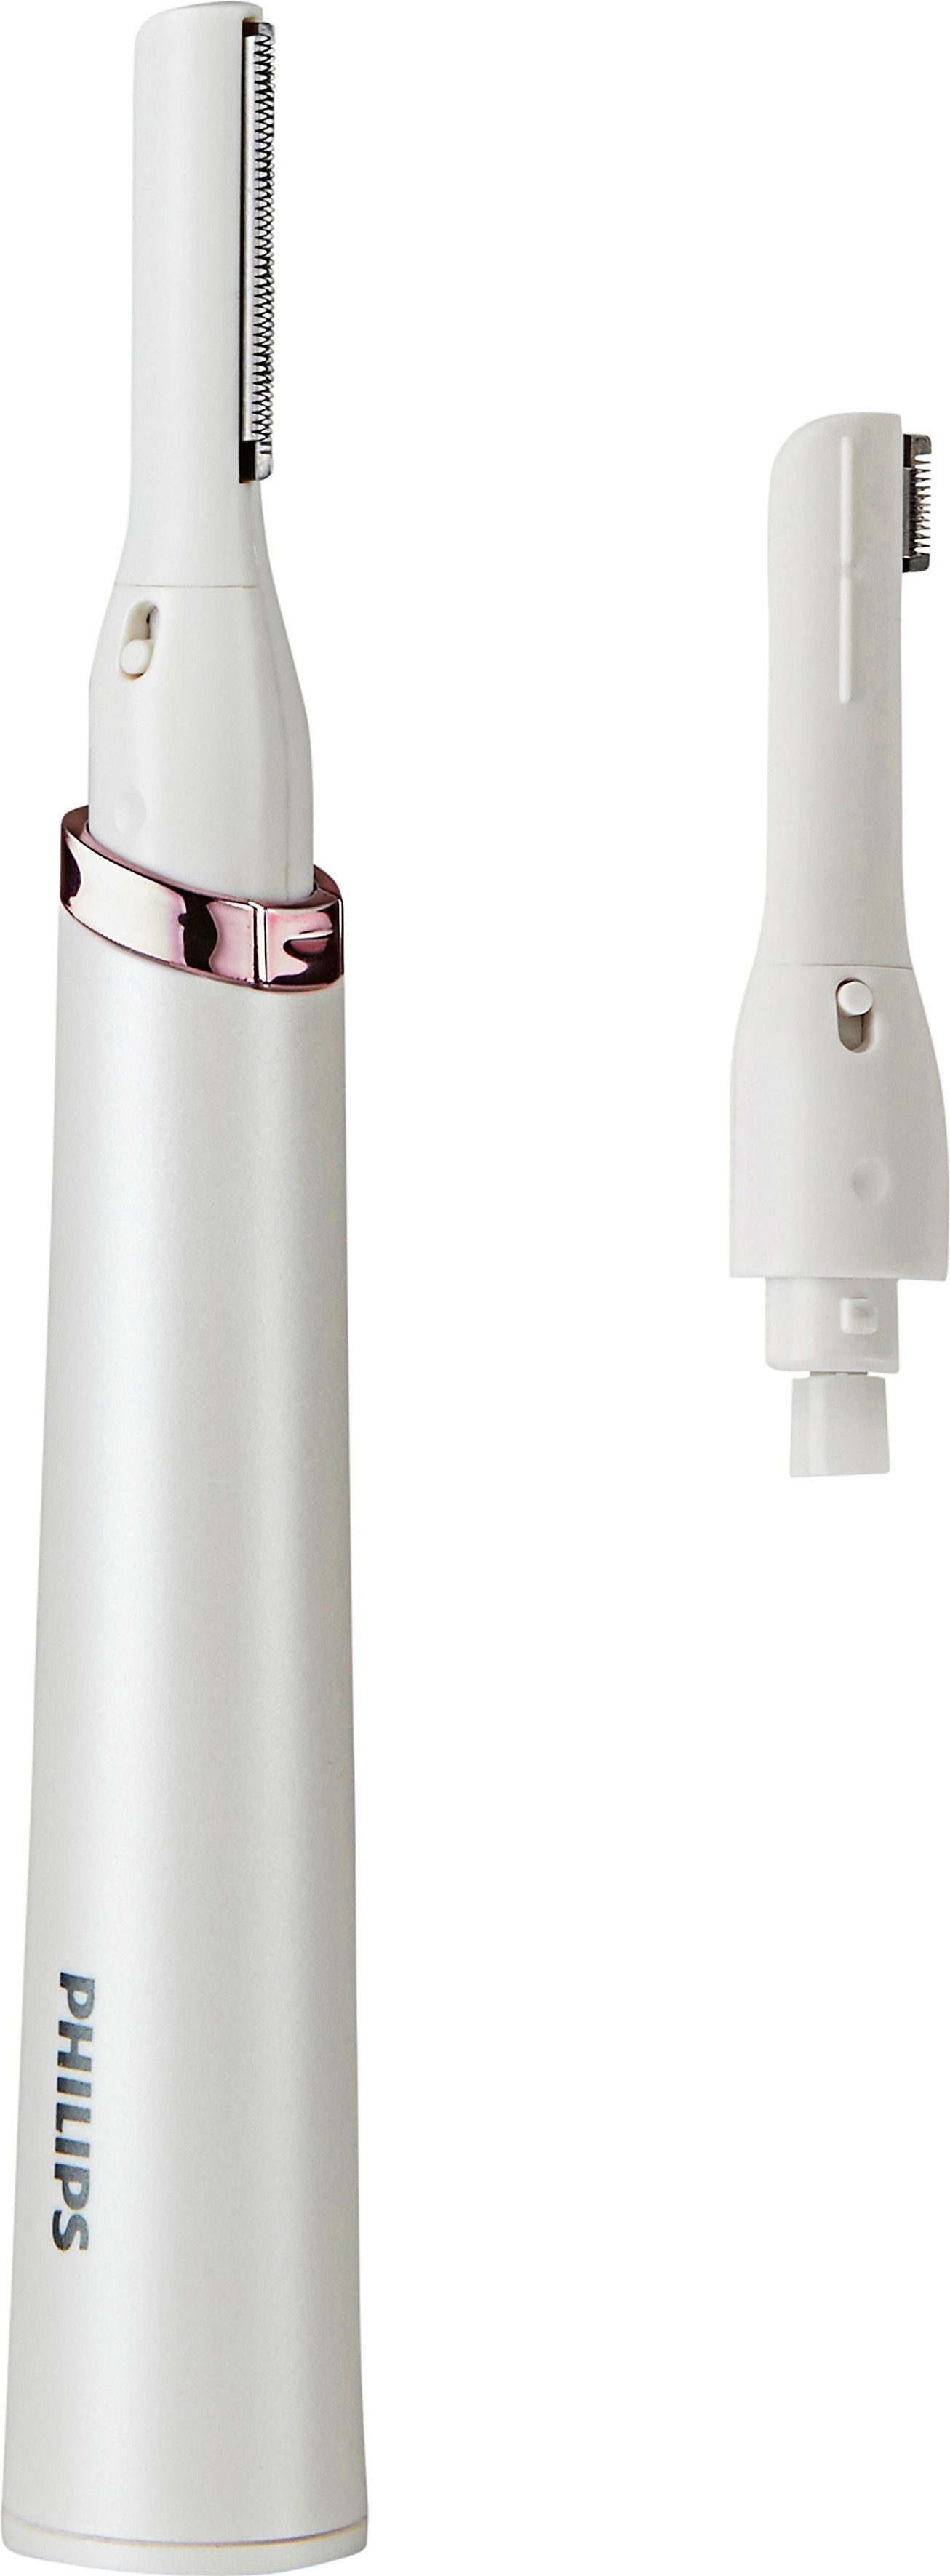 & Face Beauty-Trimmer Satin HP6393/00 Philips Compact Body